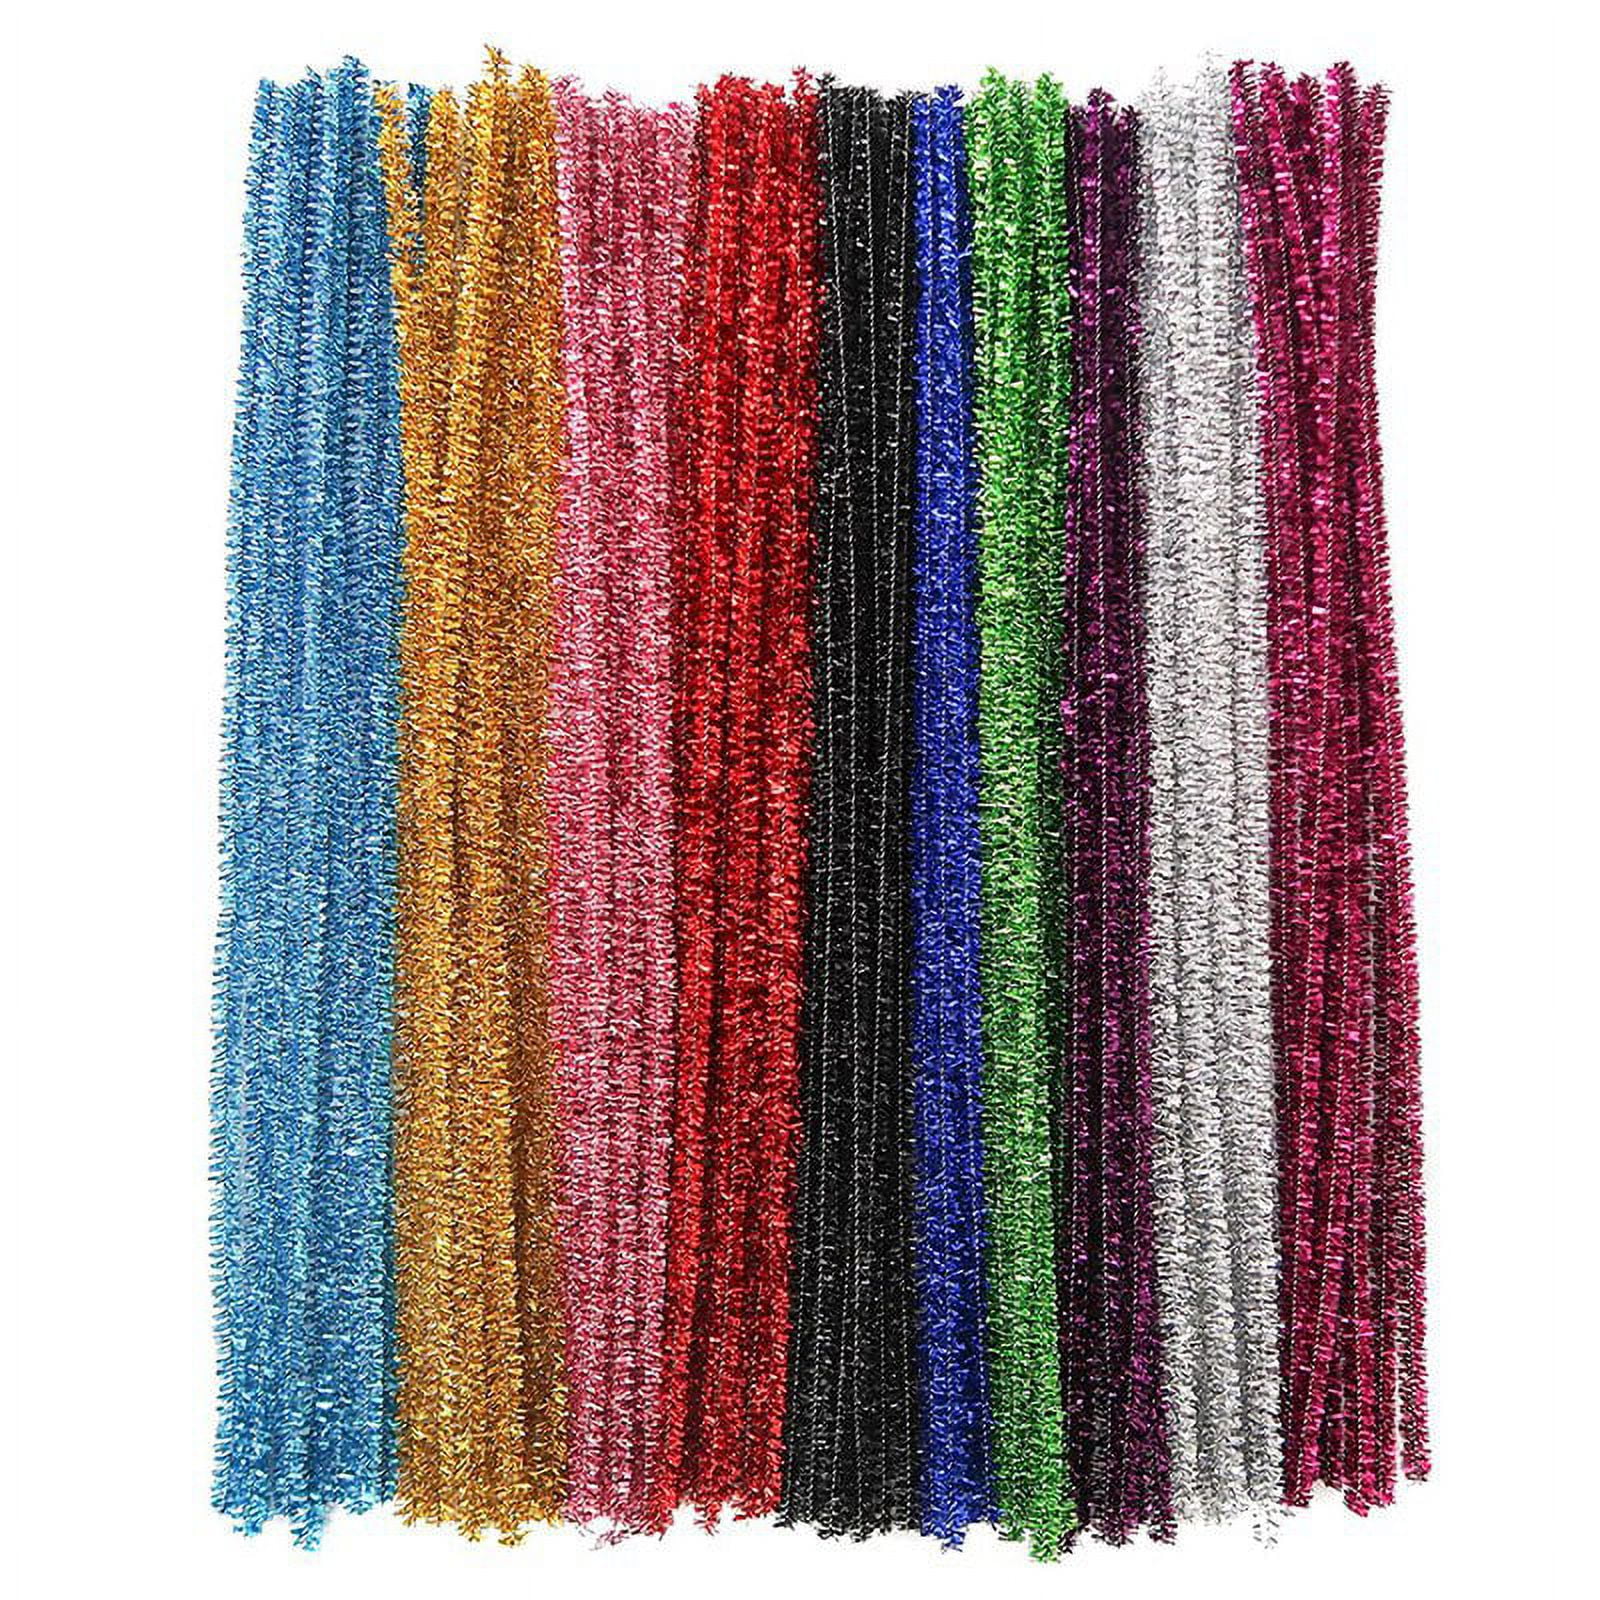 Iooleem 200pcs in 15 Glitter Colors, Pipe Cleaners,Glitter Pipe Cleaners, Chenille Stems, Pipe Cleaners for Crafts, Pipe Cleaner Crafts, Art and Craft